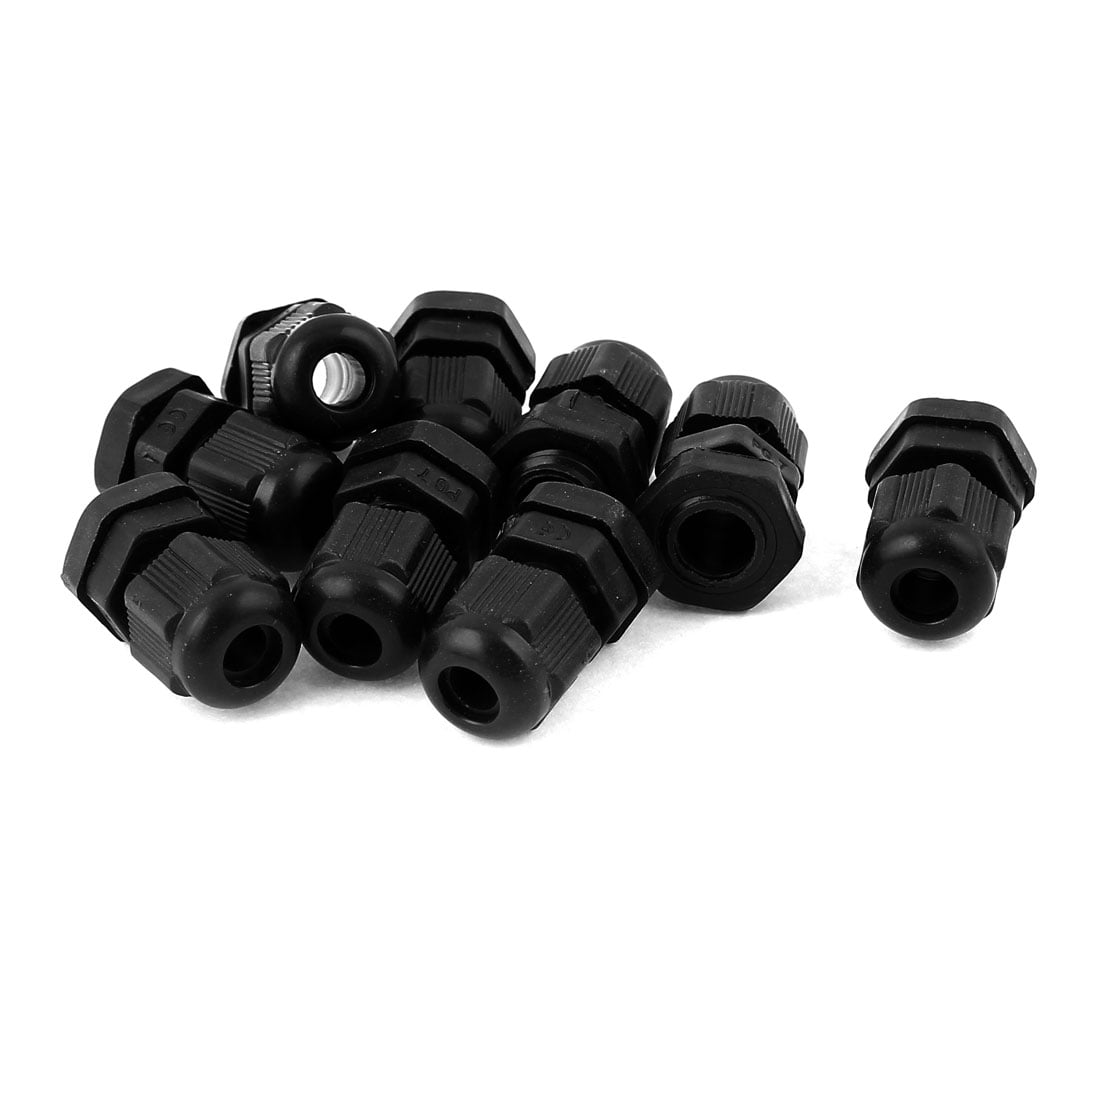 15 Pcs PG7 Waterproof Connector Gland Black for 4-7mm Diameter Cable